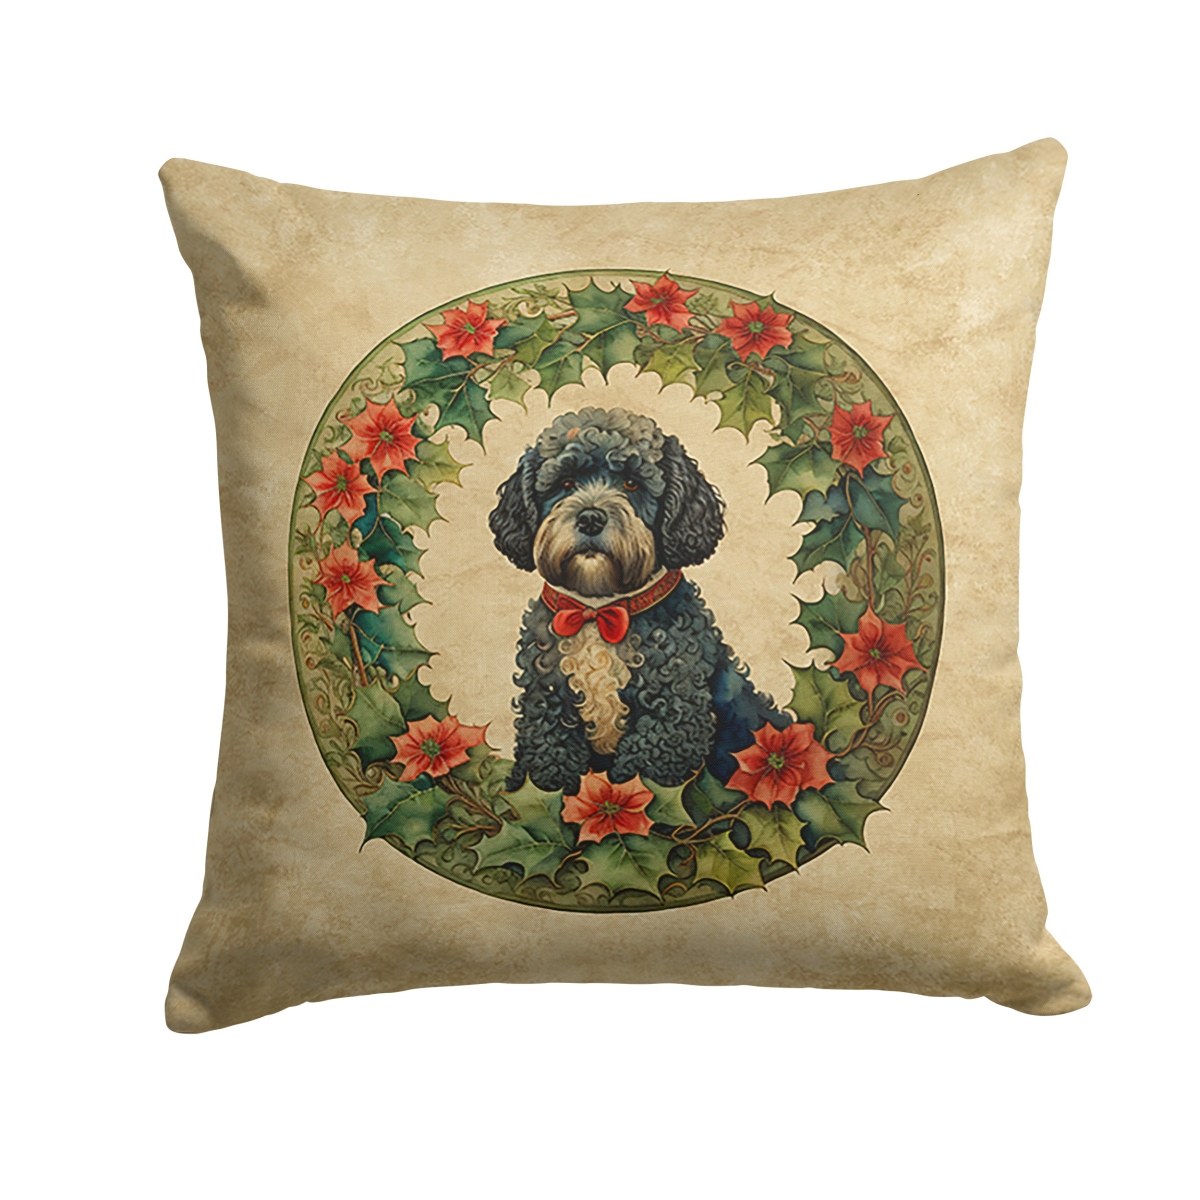 Caroline's Treasures DAC2412PW1818 18 x 18 in. Unisex Portuguese Water Dog Christmas Flowers Polyester Fabric Throw Pillow